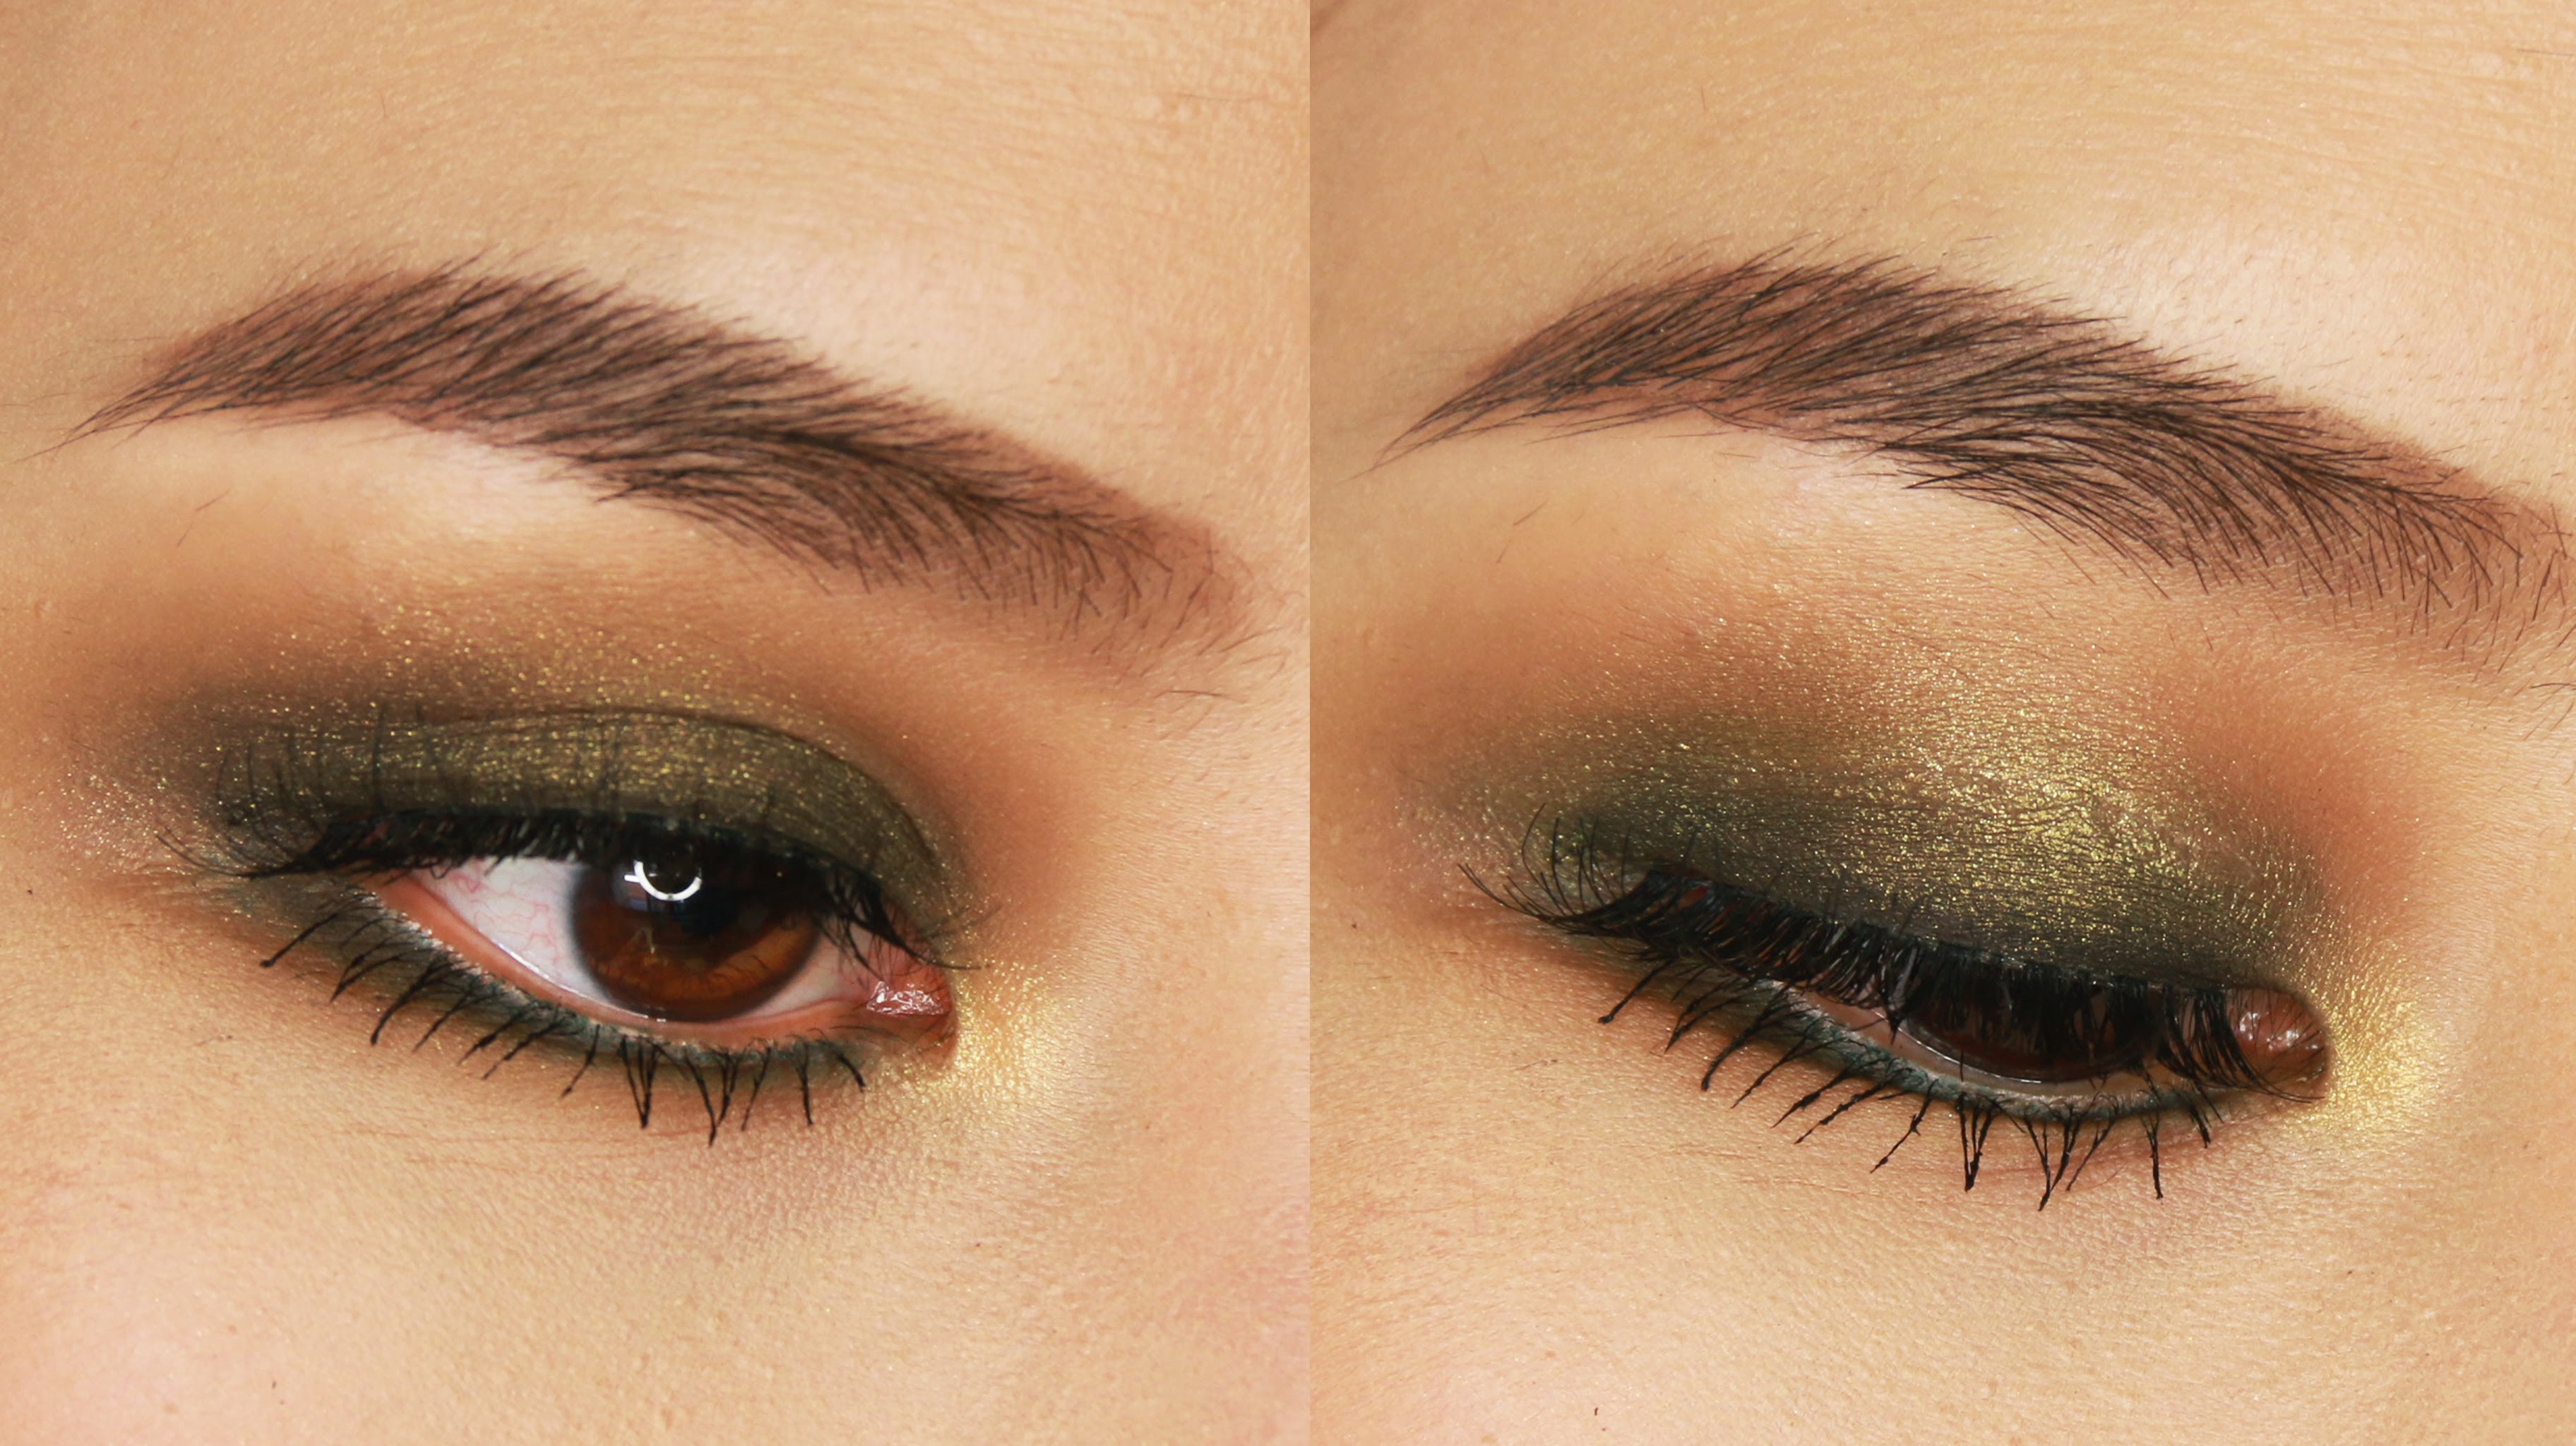 Gold Makeup For Green Eyes 5 Minute Green Smokey Eye Makeup Tutorial For Small Or Hooded Eyes